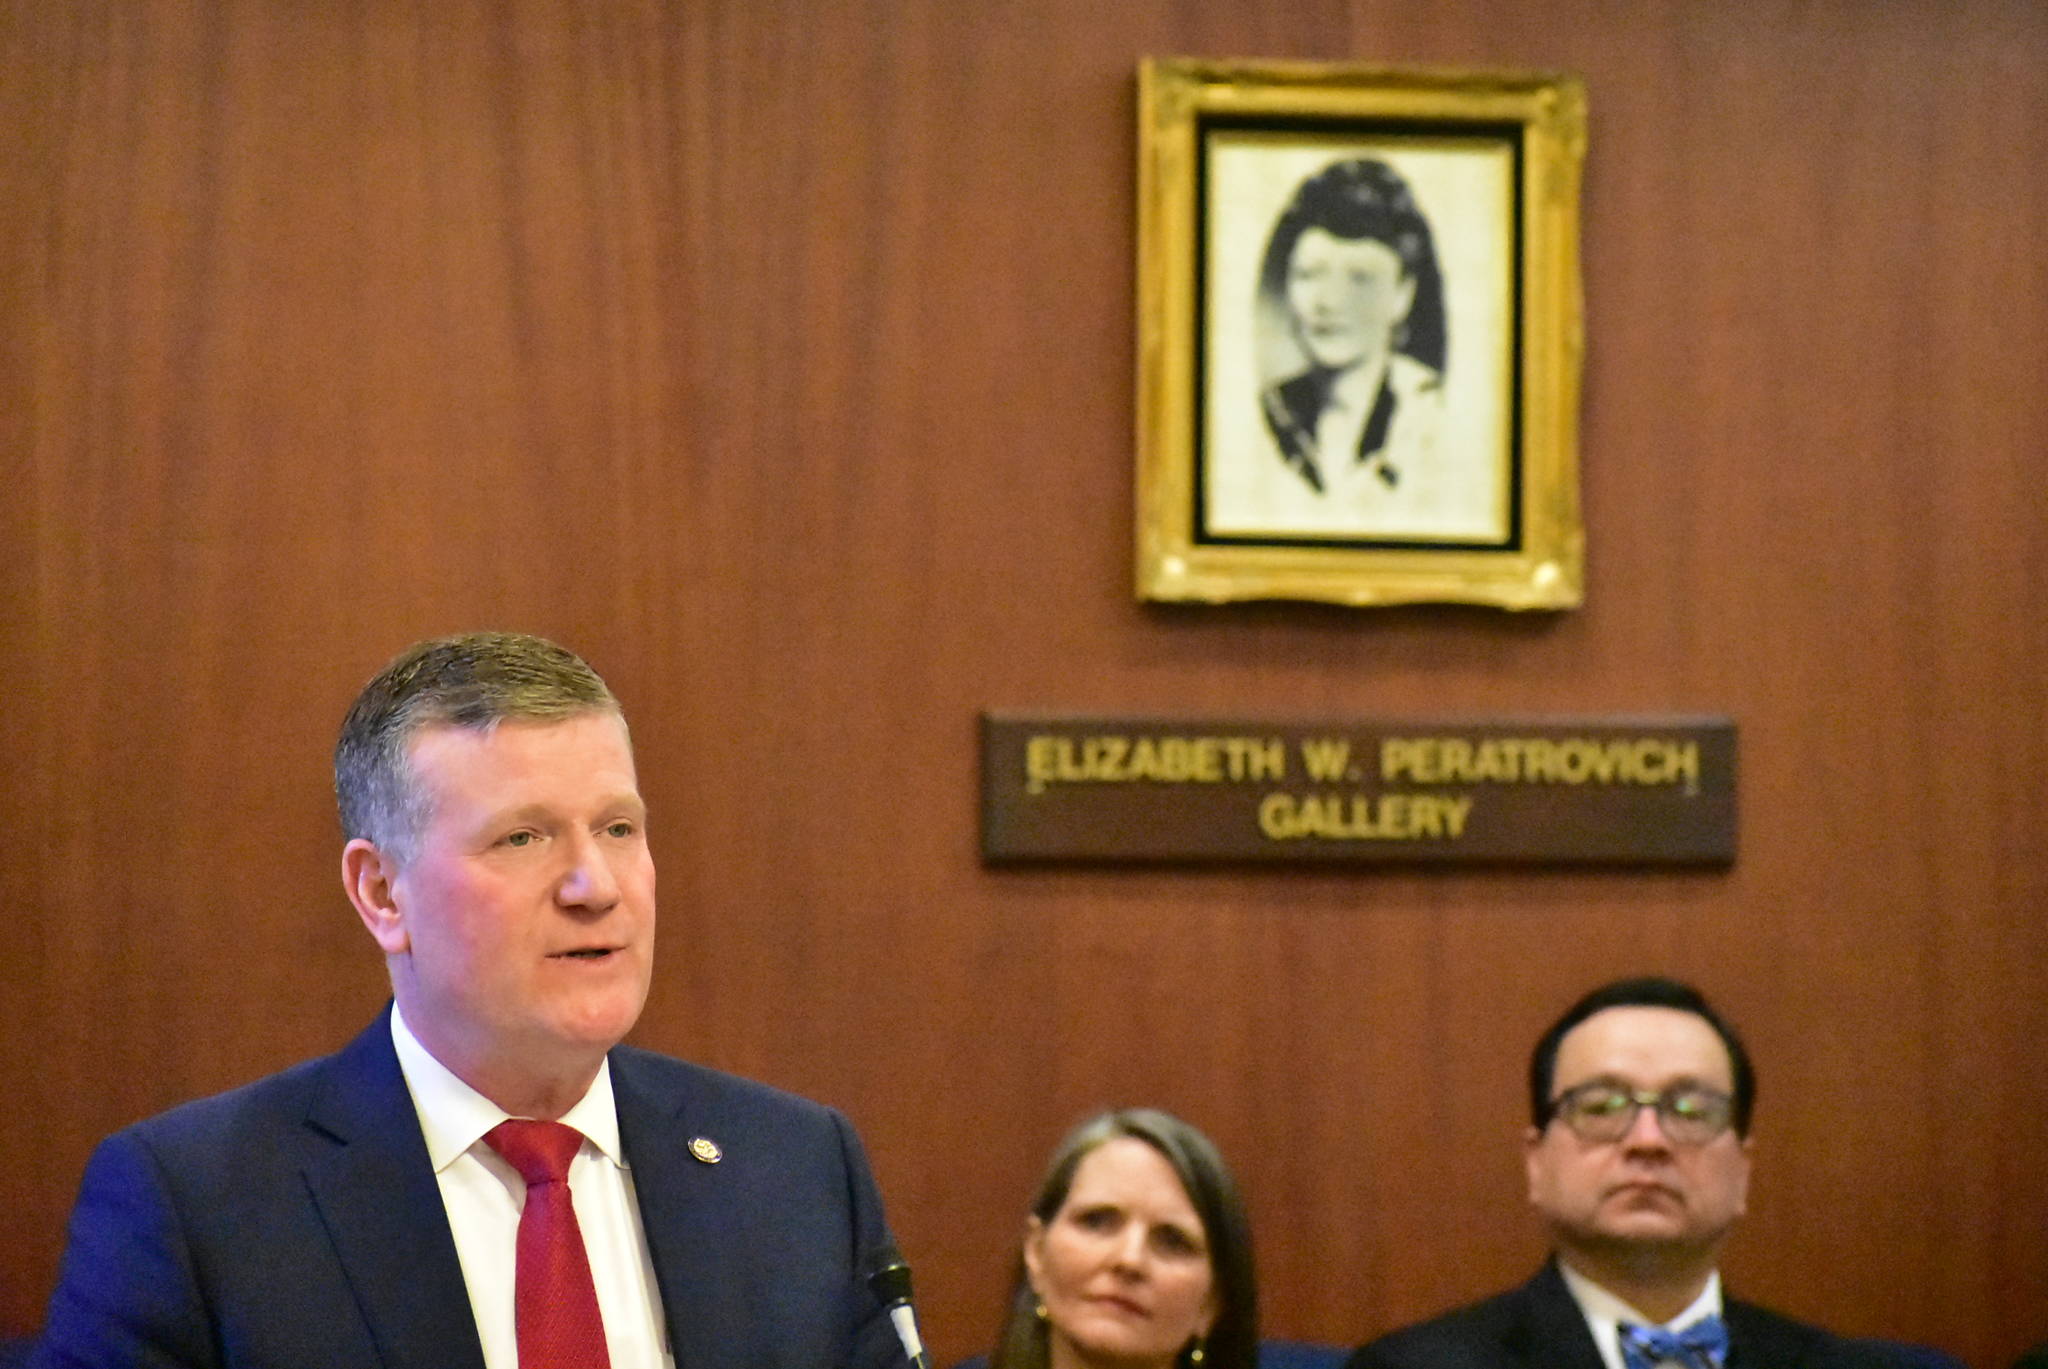 Rep. Chuck Kopp, R-Anchorage, speaks in support of his bill to recognize Alaska’s 229 already federally-recognized tribes on Friday, March 13, 2020. A photo of Alaska Native civil rights pioneer Elizabeth Peratrovich can be seen in the background. (Peter Segall | Juneau Empire)